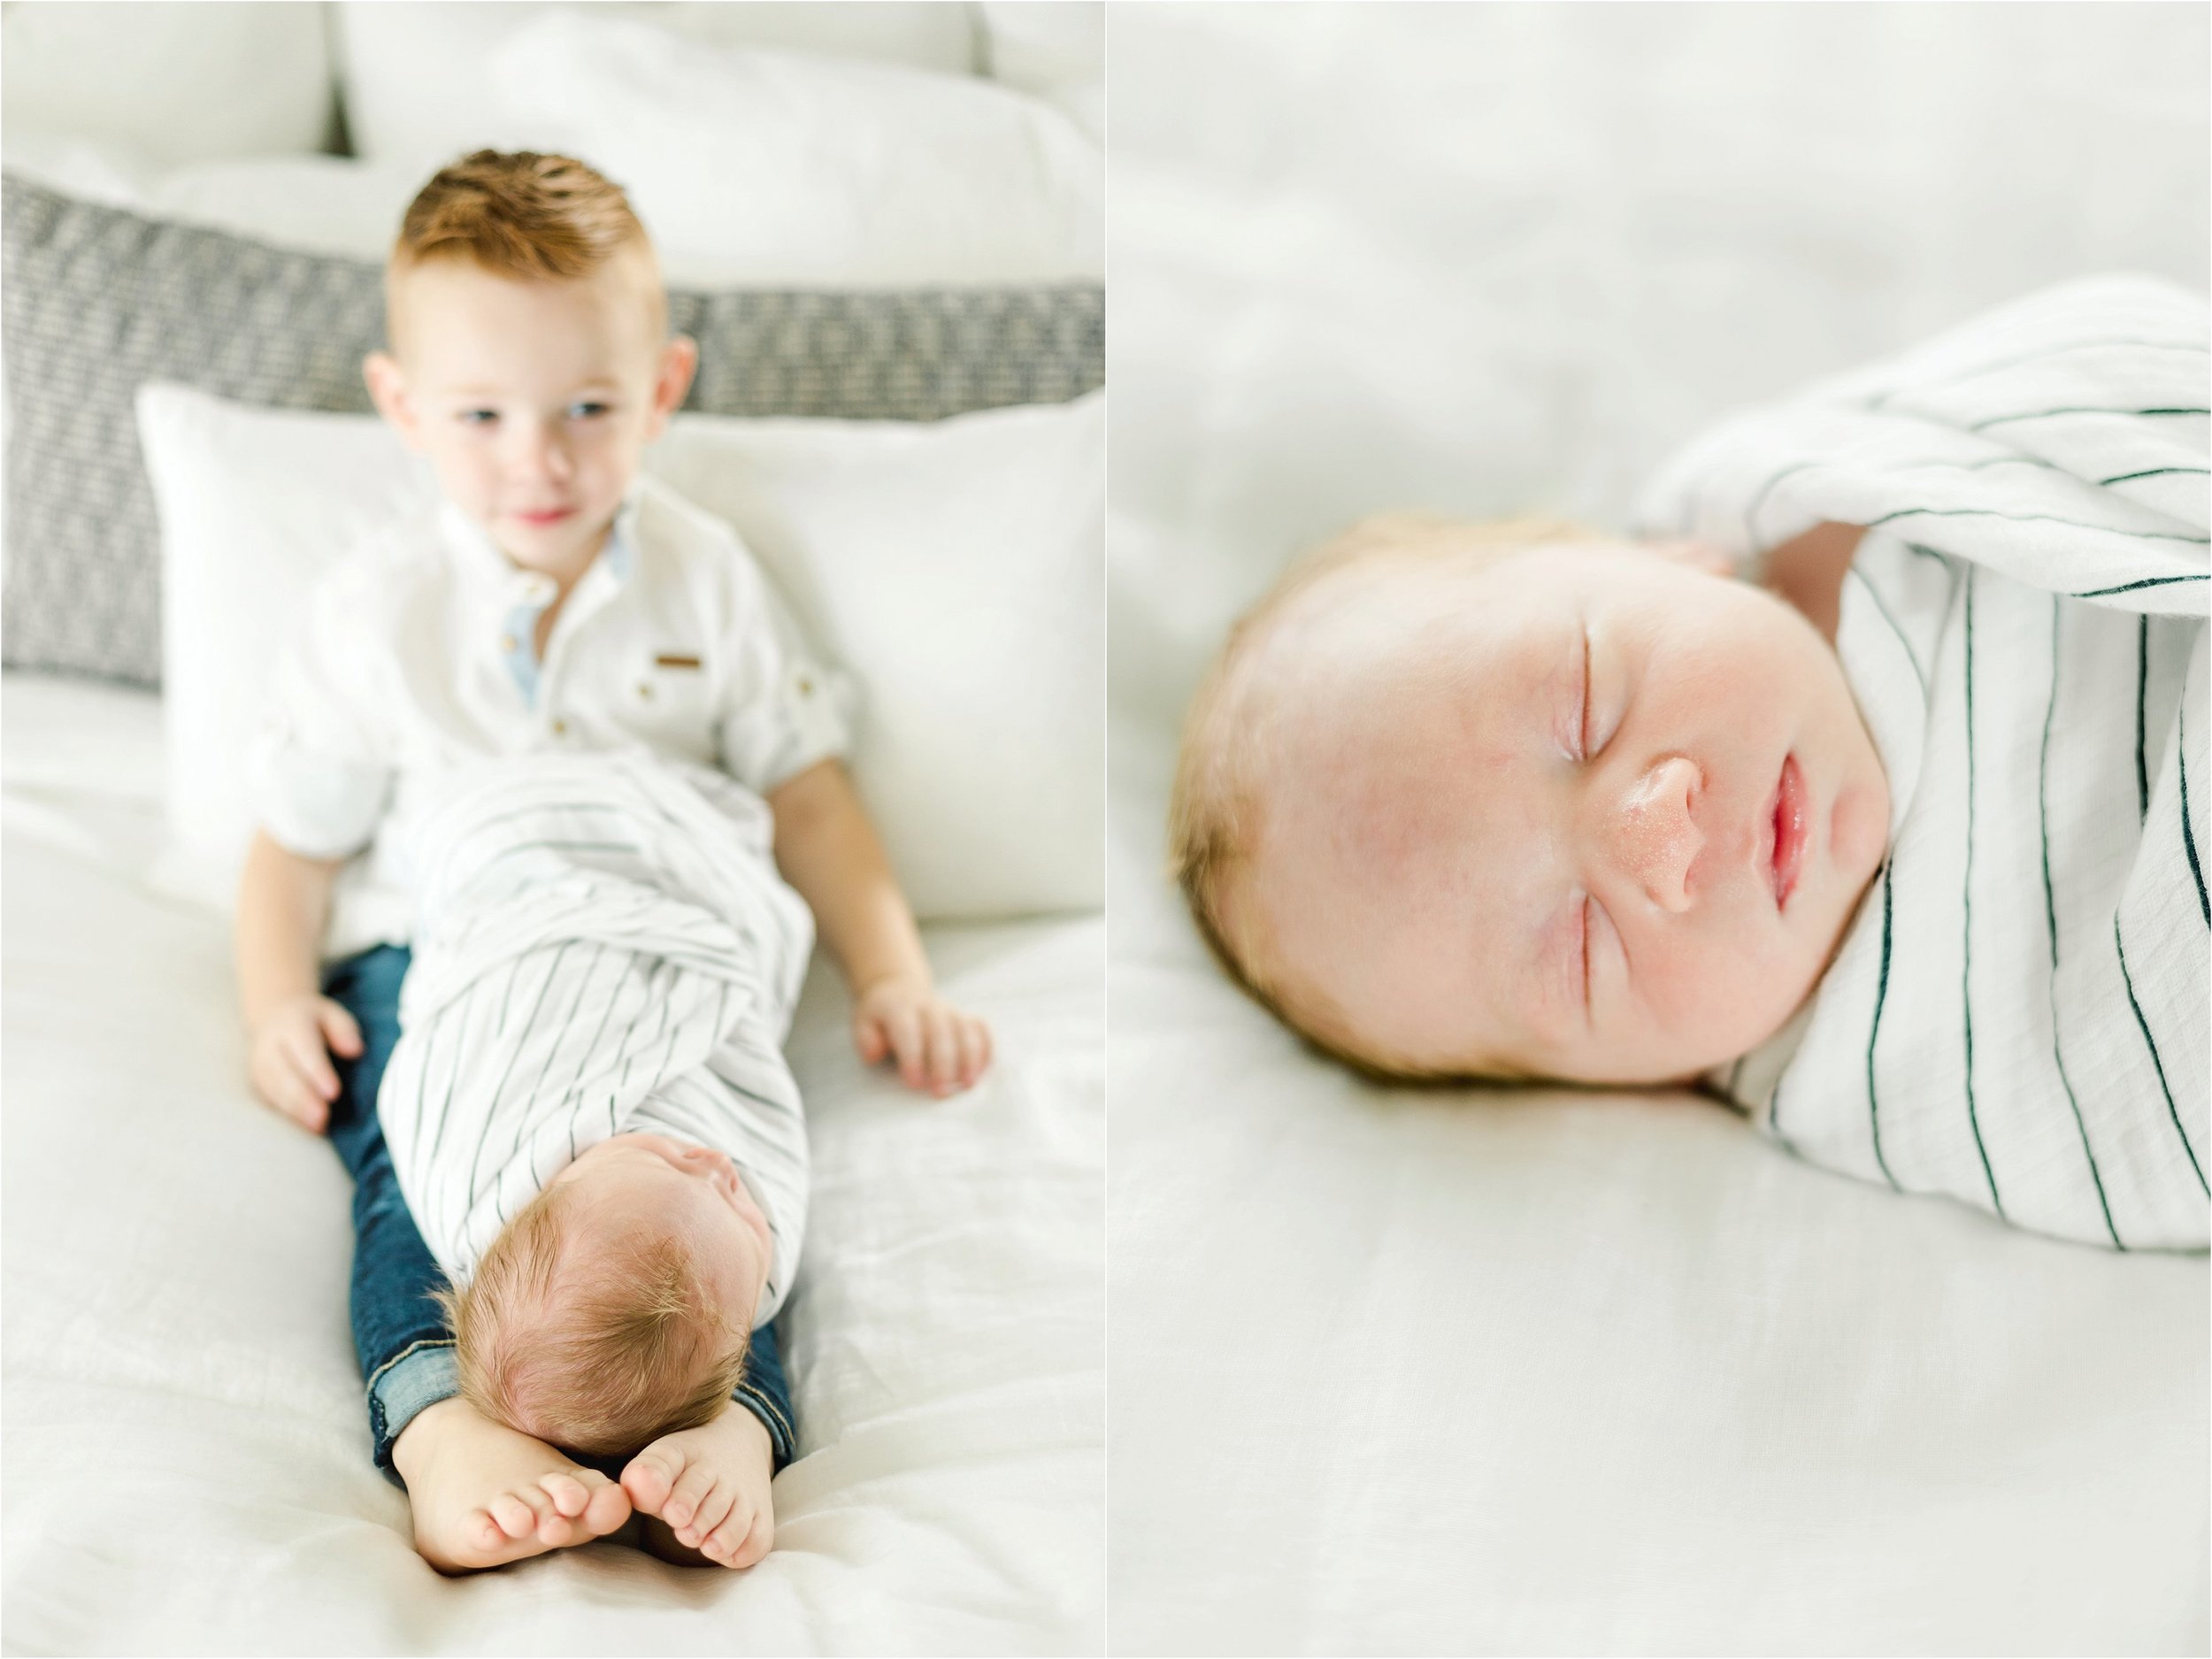 Image on the left shows toddler brother sitting on a bed while his baby brother lies on his lap.  Image on the right shows baby boy fast asleep while swaddled in a black and white striped swaddle.